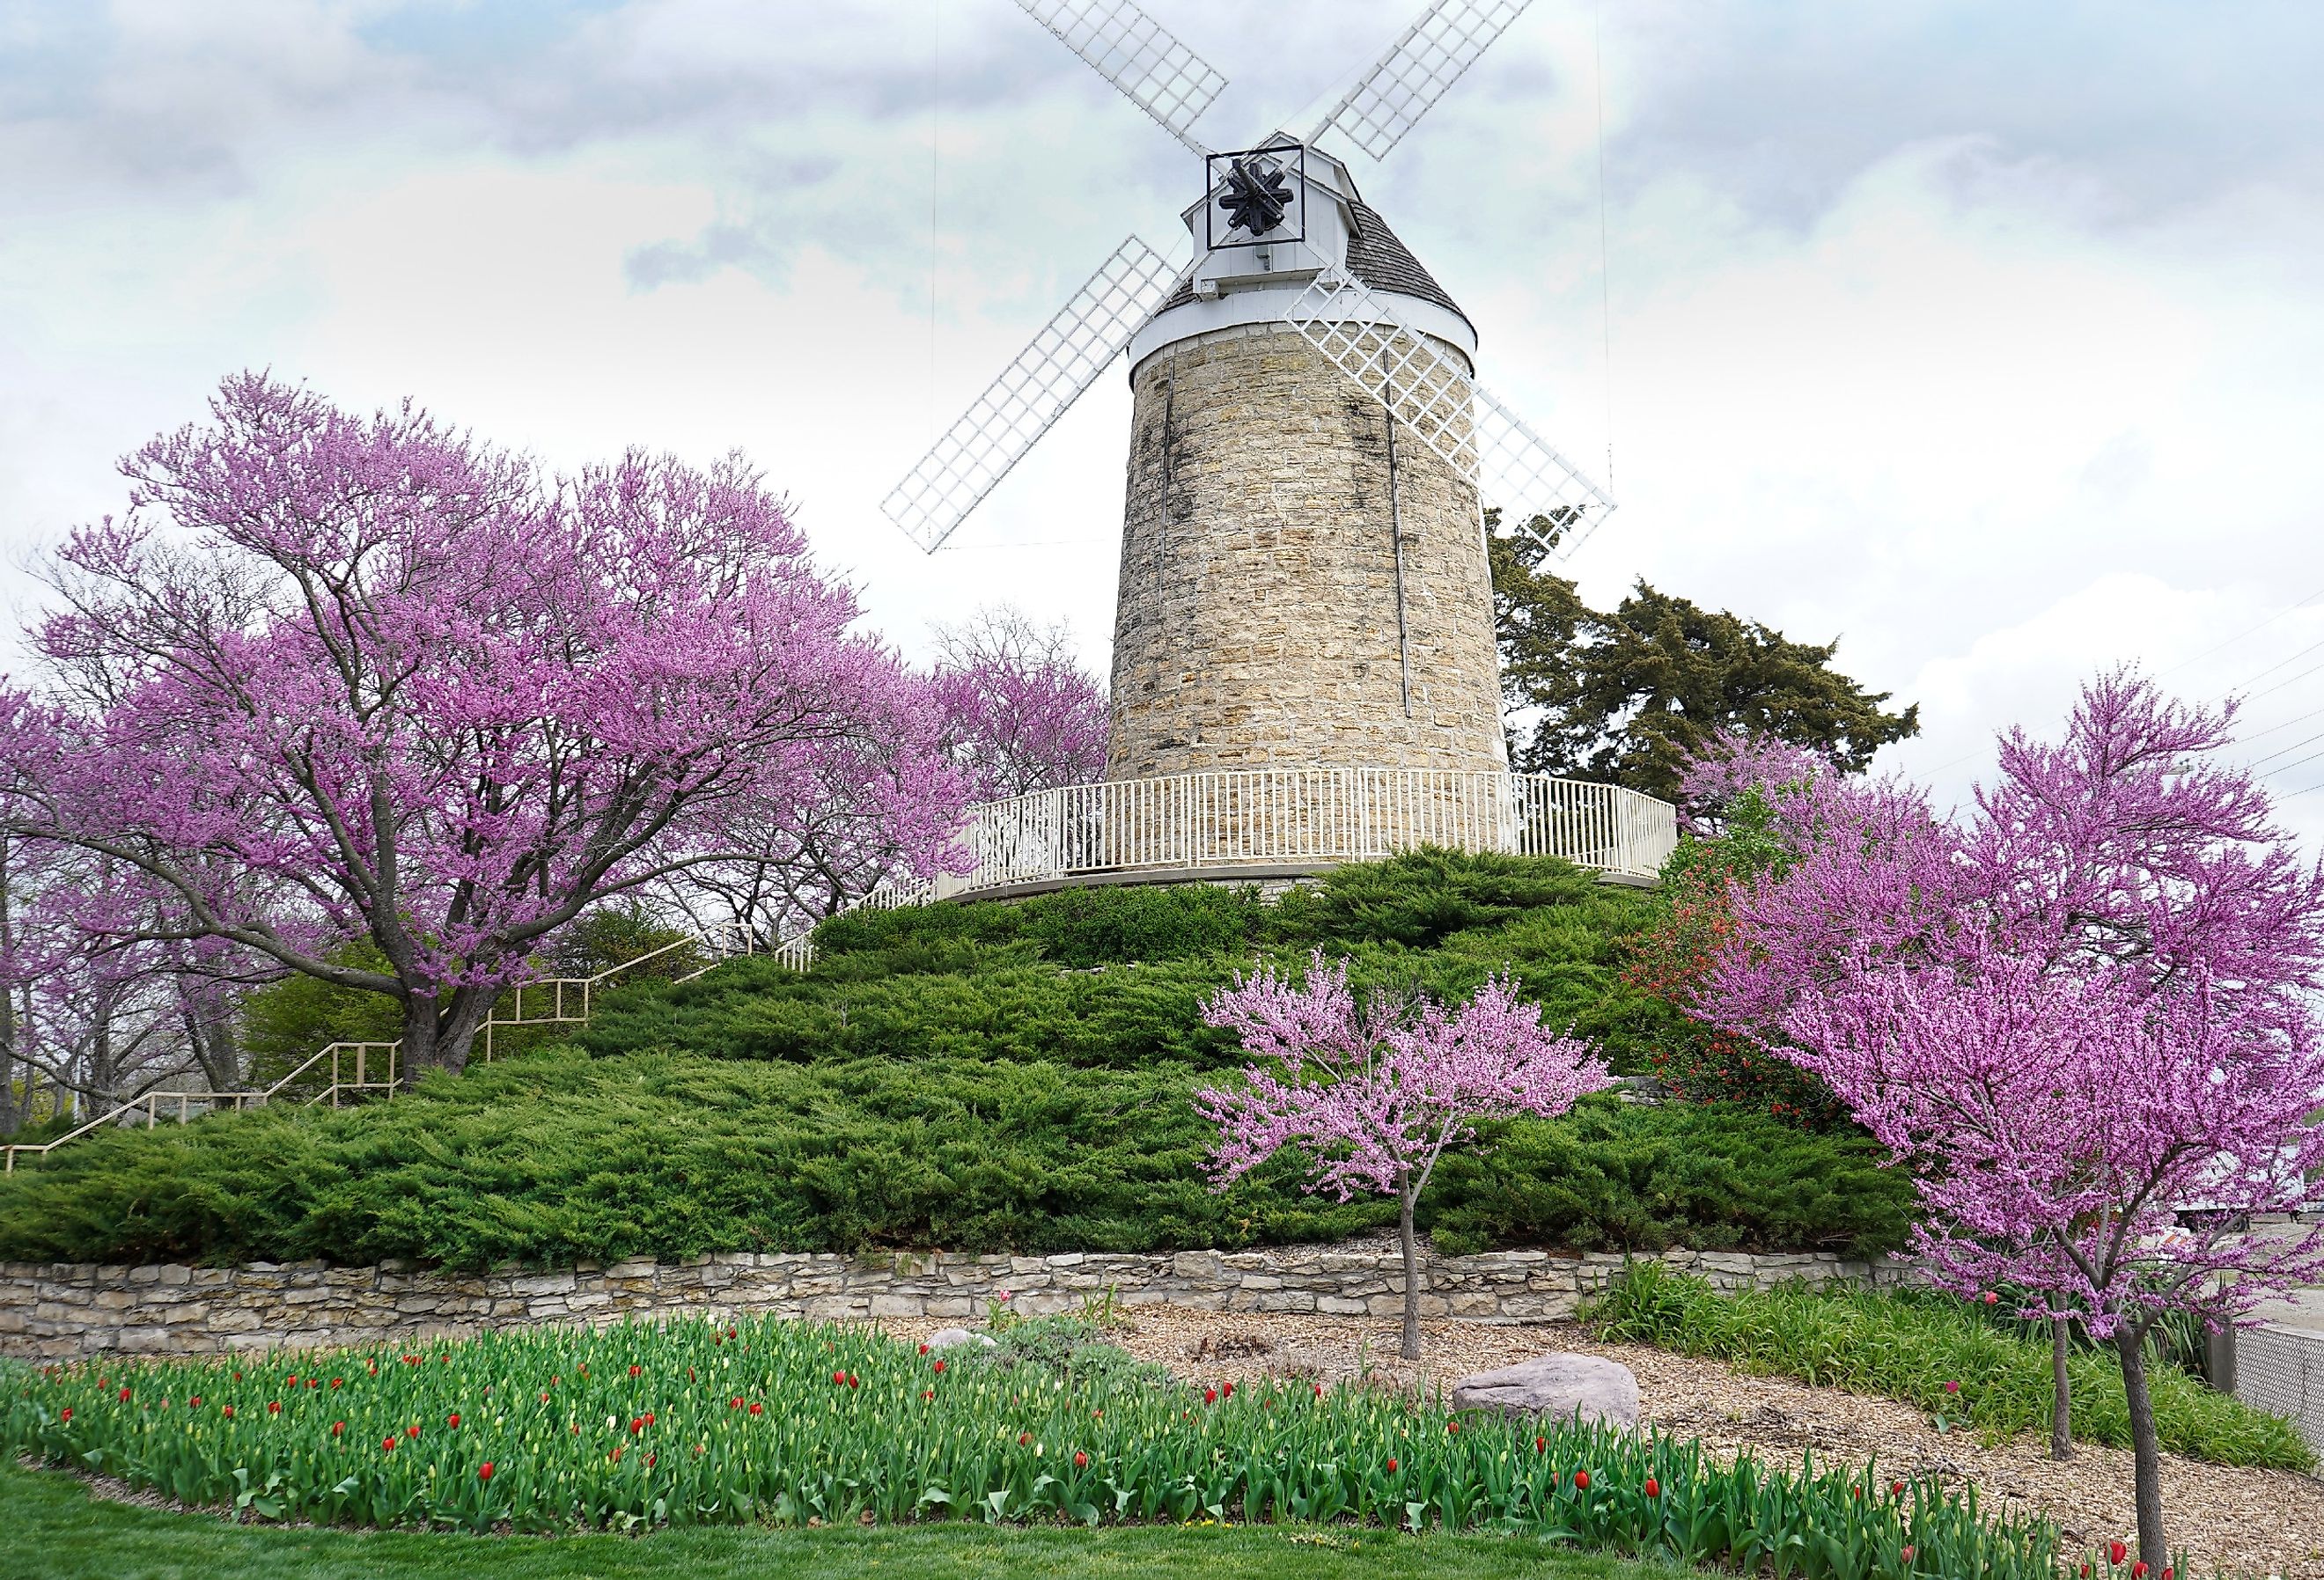 Windmill in Wamego City Park, Kansas with pink blossoms on trees.